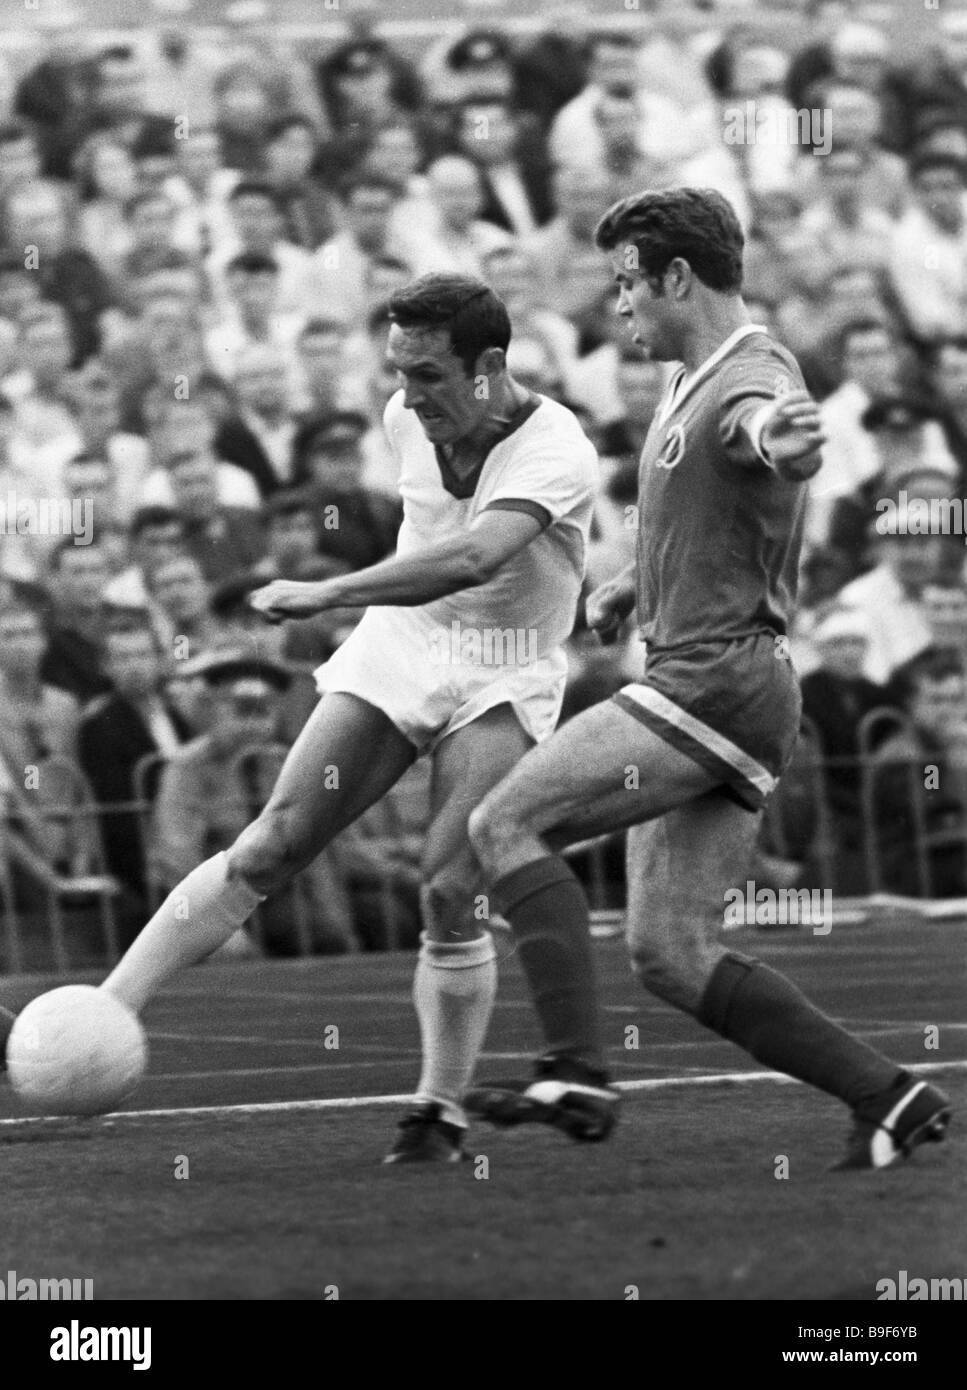 Football players Valery Zykov Moscow right and Anatoly Puzach Kiev ...